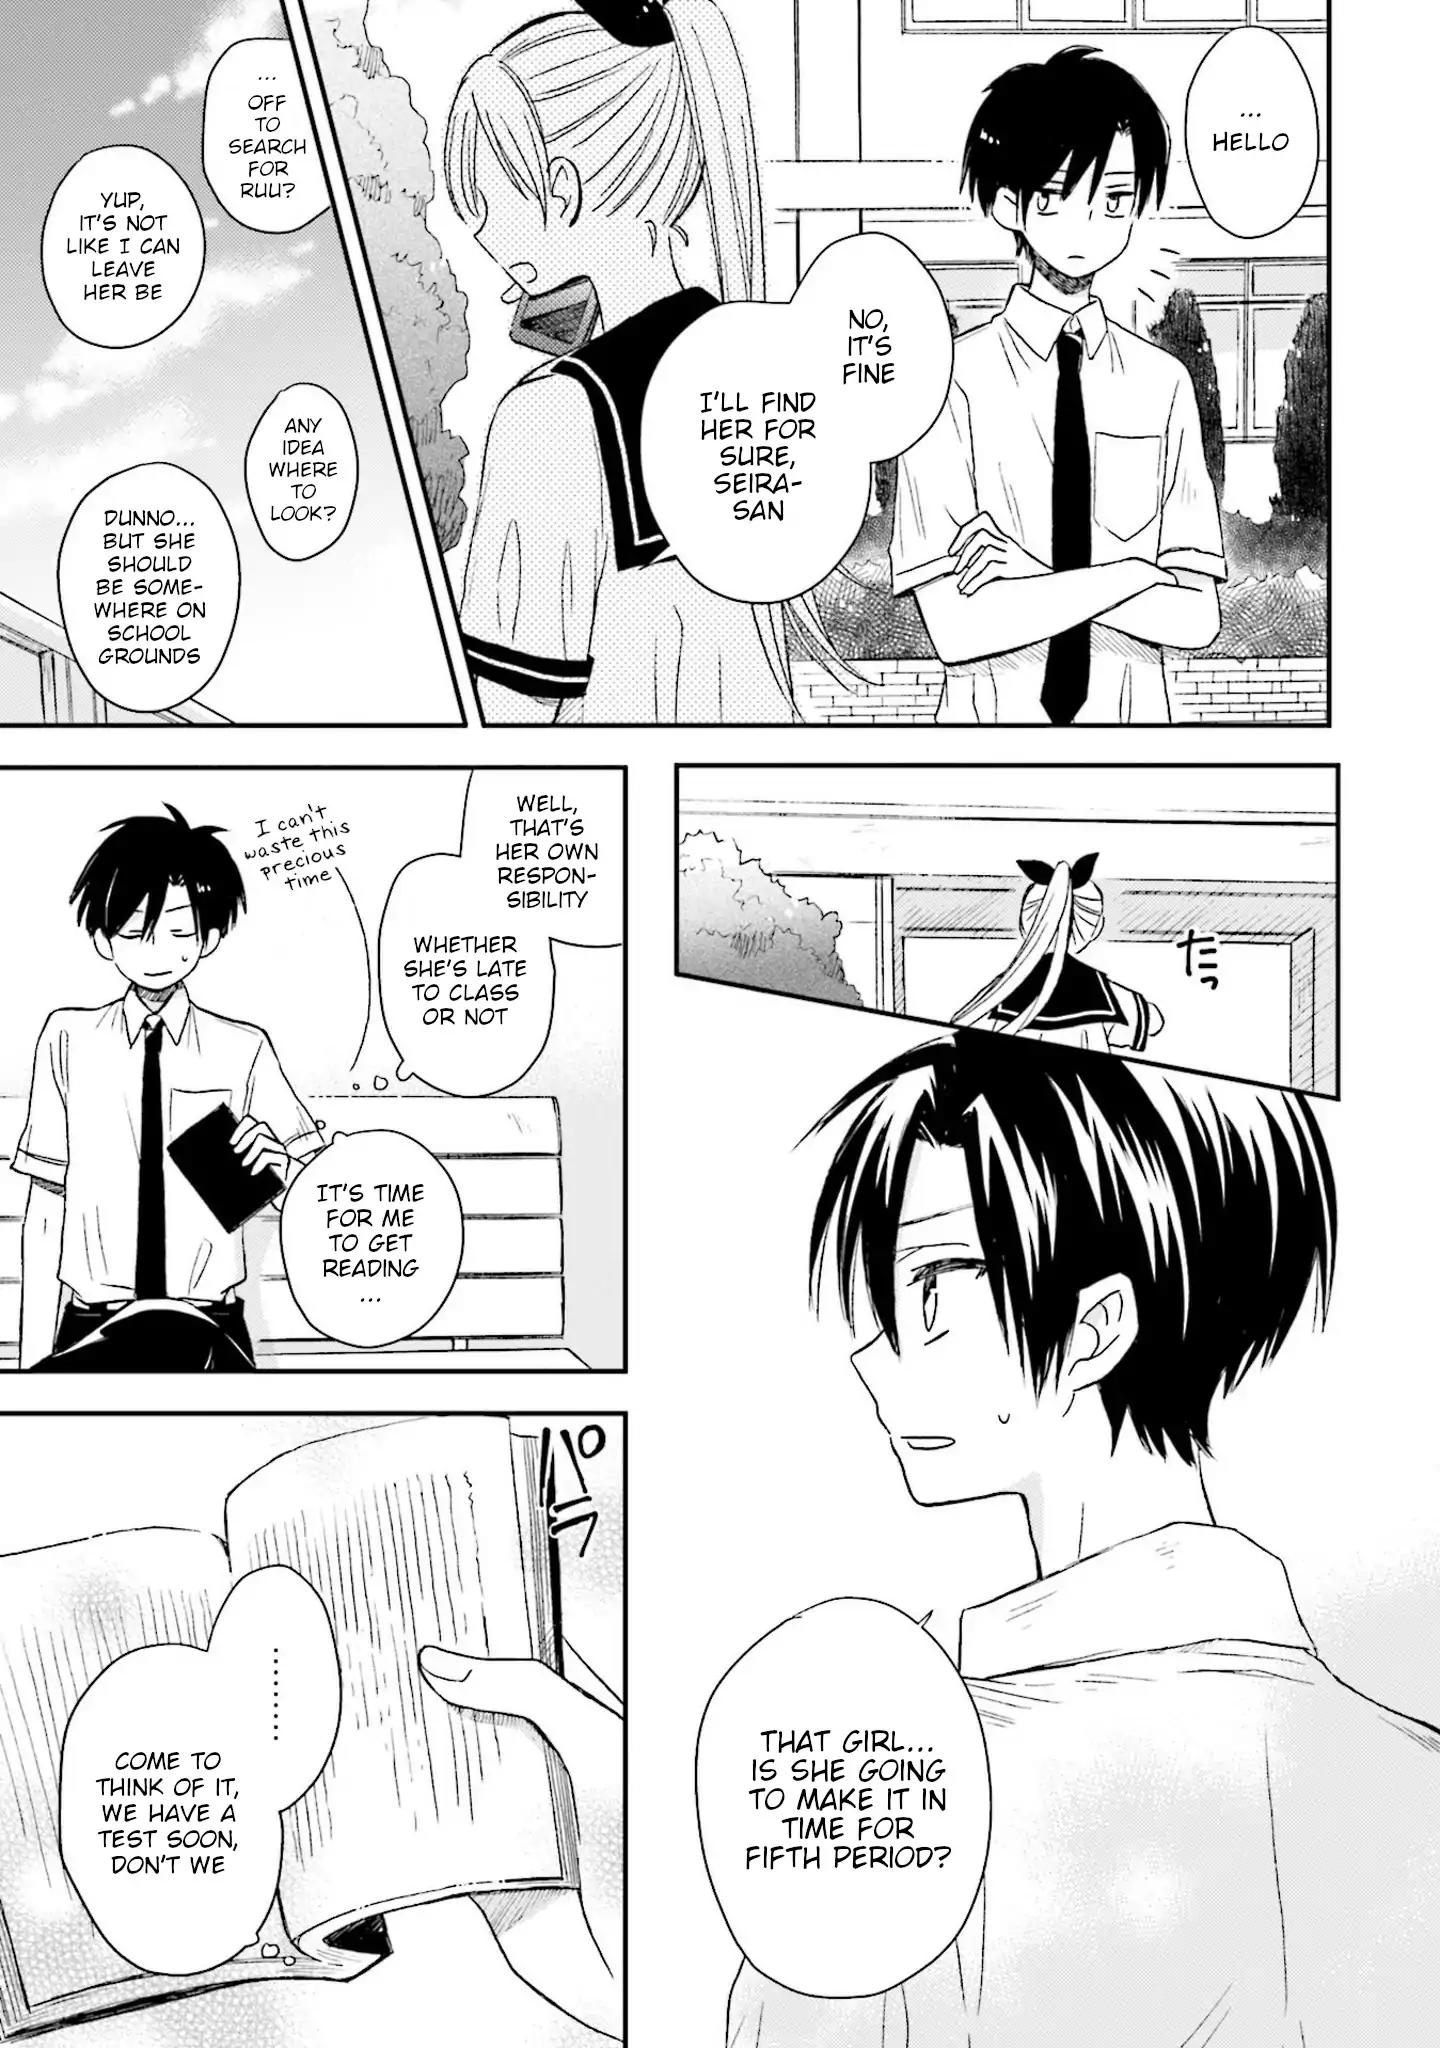 This Love Is Assumption Outside for Fukami Kun Vol.1 Chapter 5